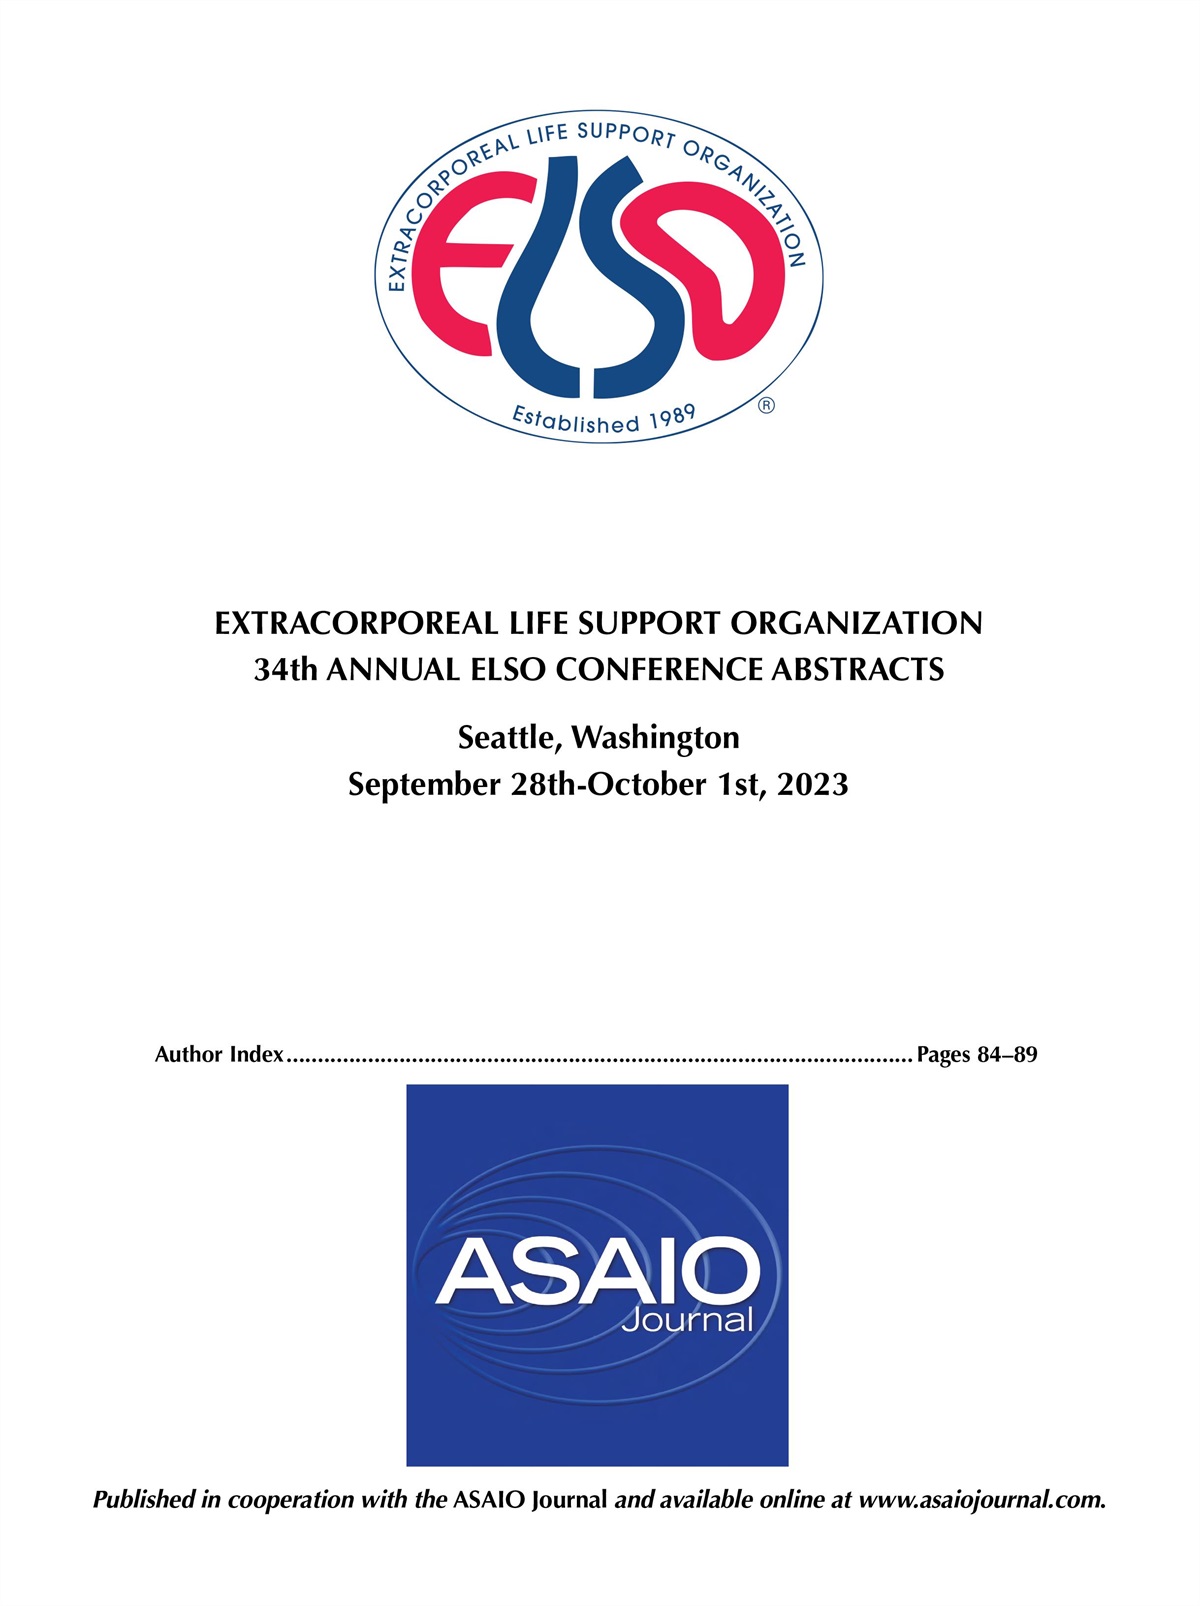 162: Ethical and Moral Issues in Providing Extracorporeal Membrane Oxygenation (ECMO) Support: A Survey of the American Society of Anesthesiologists (ASA) Committee on Critical Care Medicine (CCM) and Extracorporeal Life Support Organization (ELSO) Membership